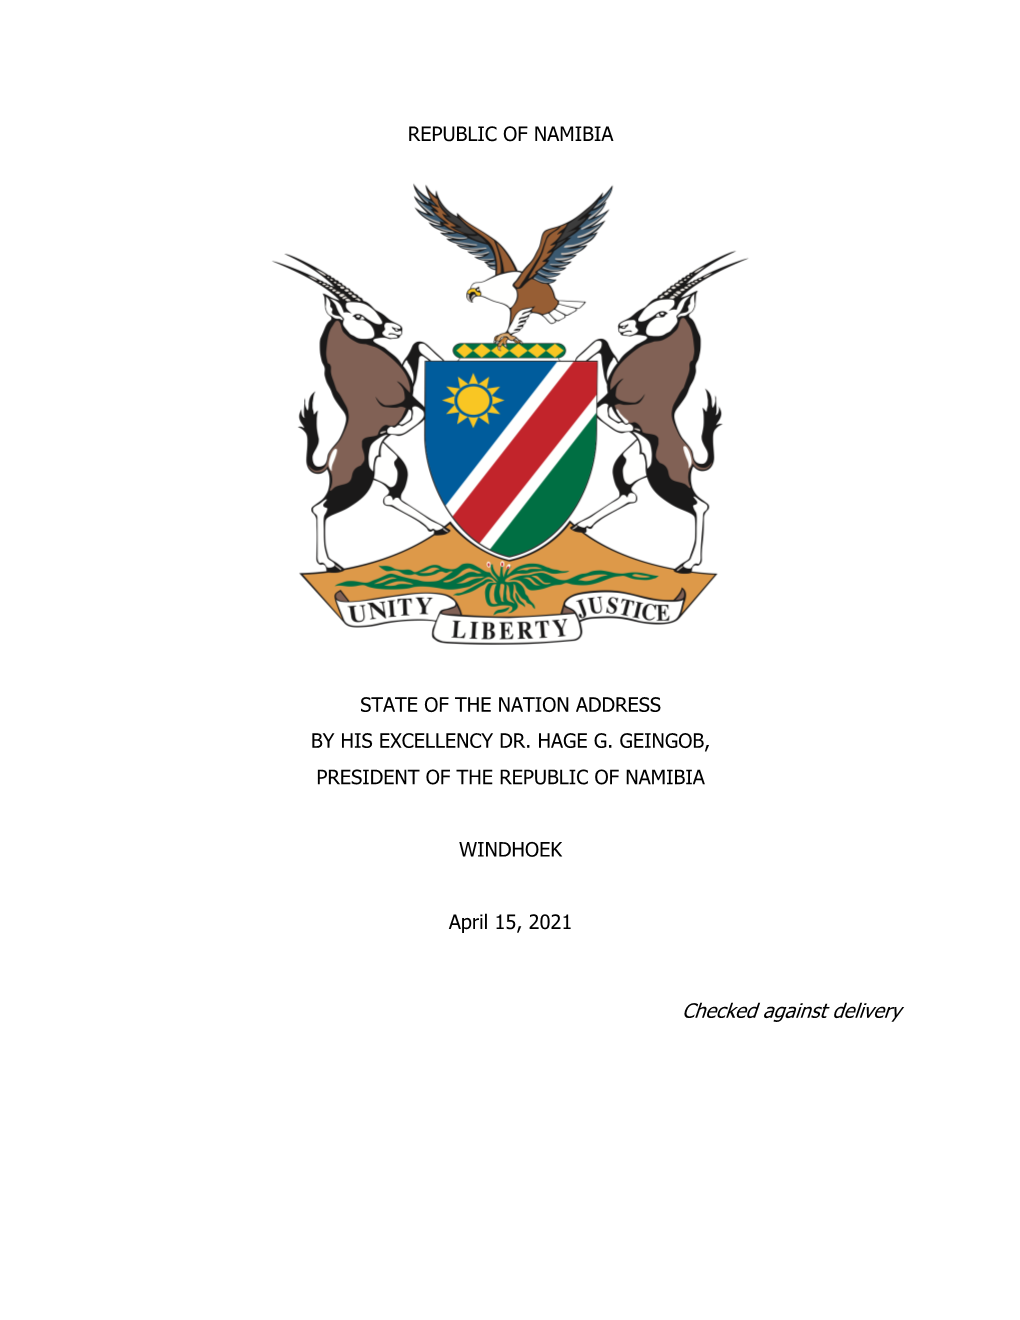 Statement by President Hage G. Geingob on the Occasion of The